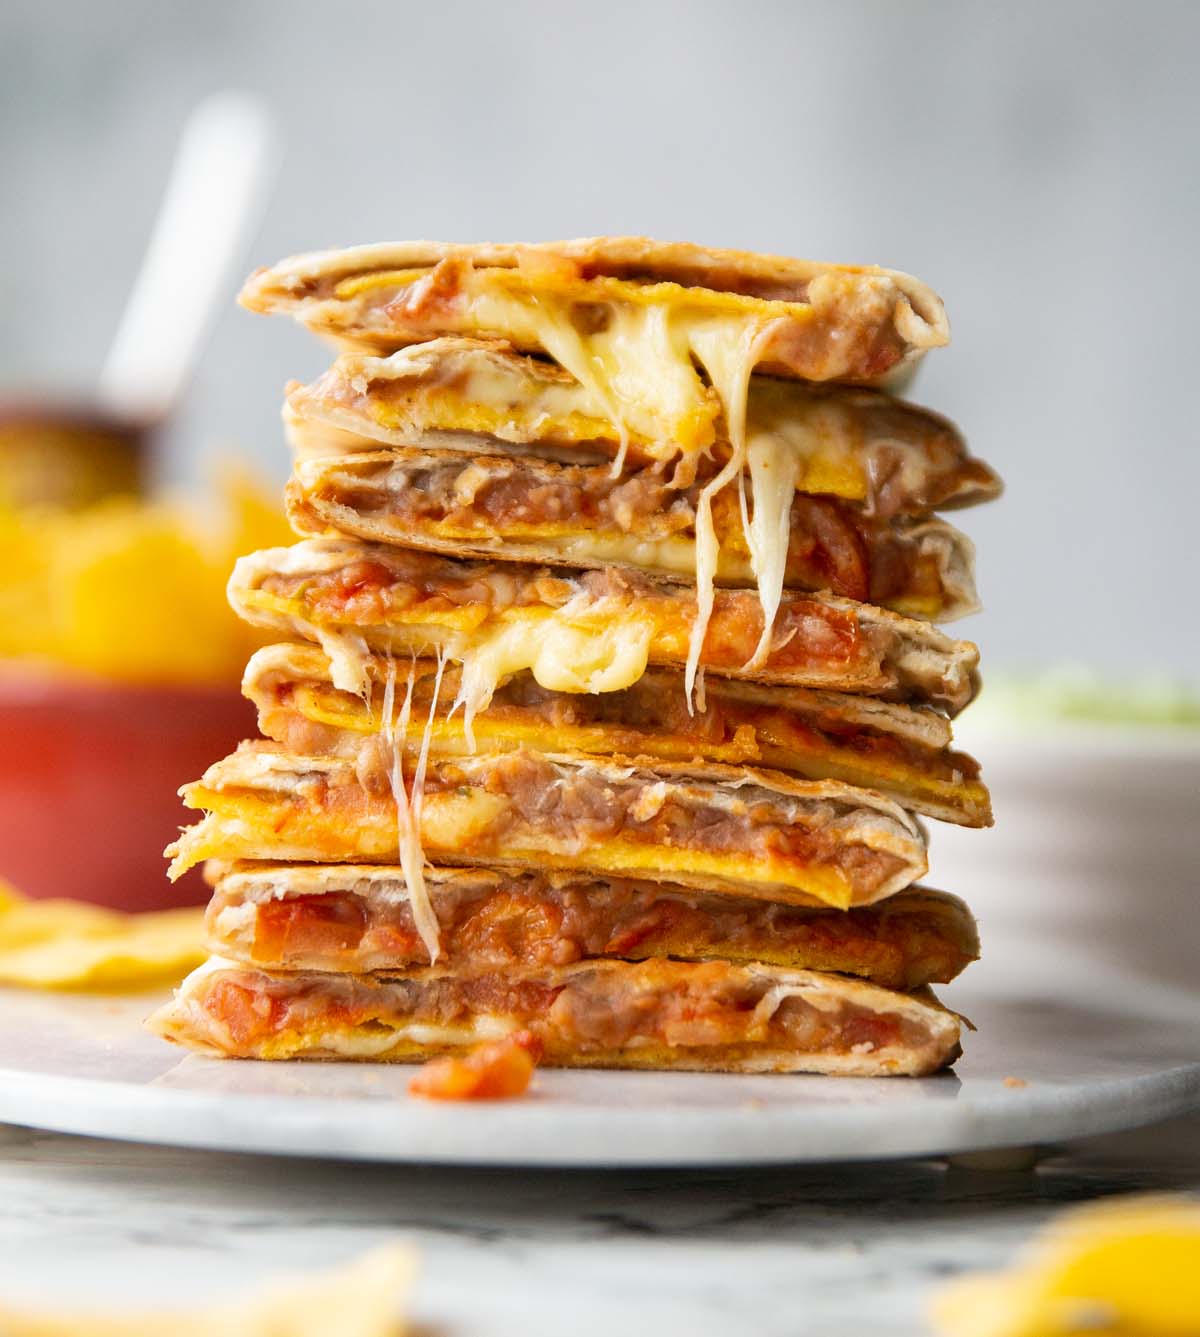 8 refried bean quesadillas halves stacked on each other on marble plate with ingredients blurred in background